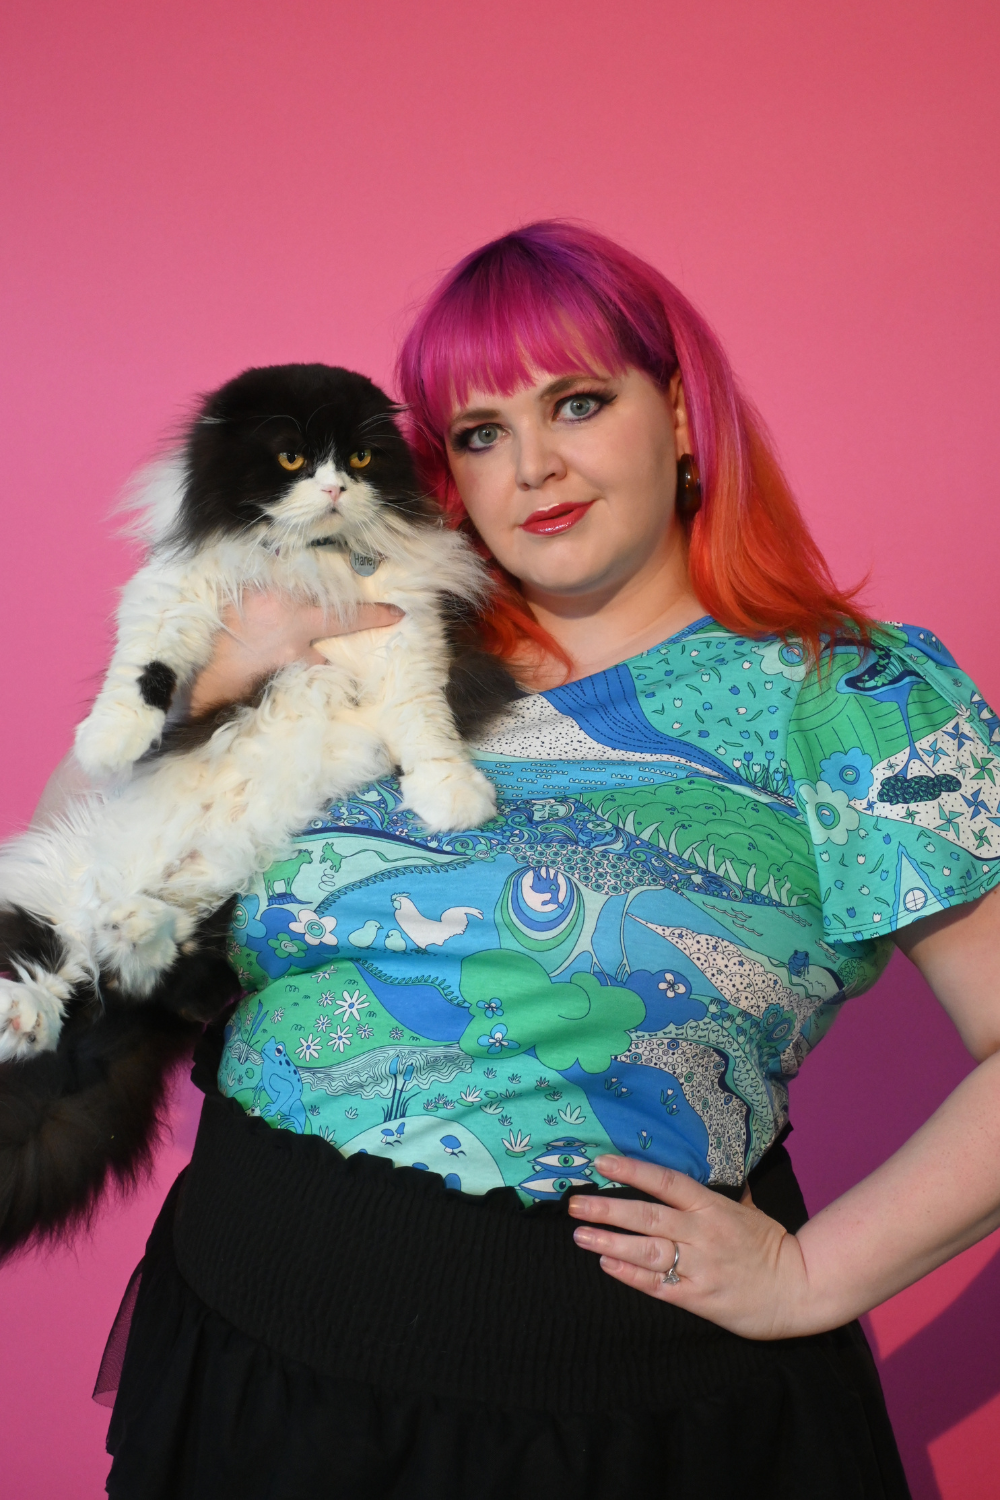 Pink haired model holding cat wearing shirt with landscape graphic in green and blue